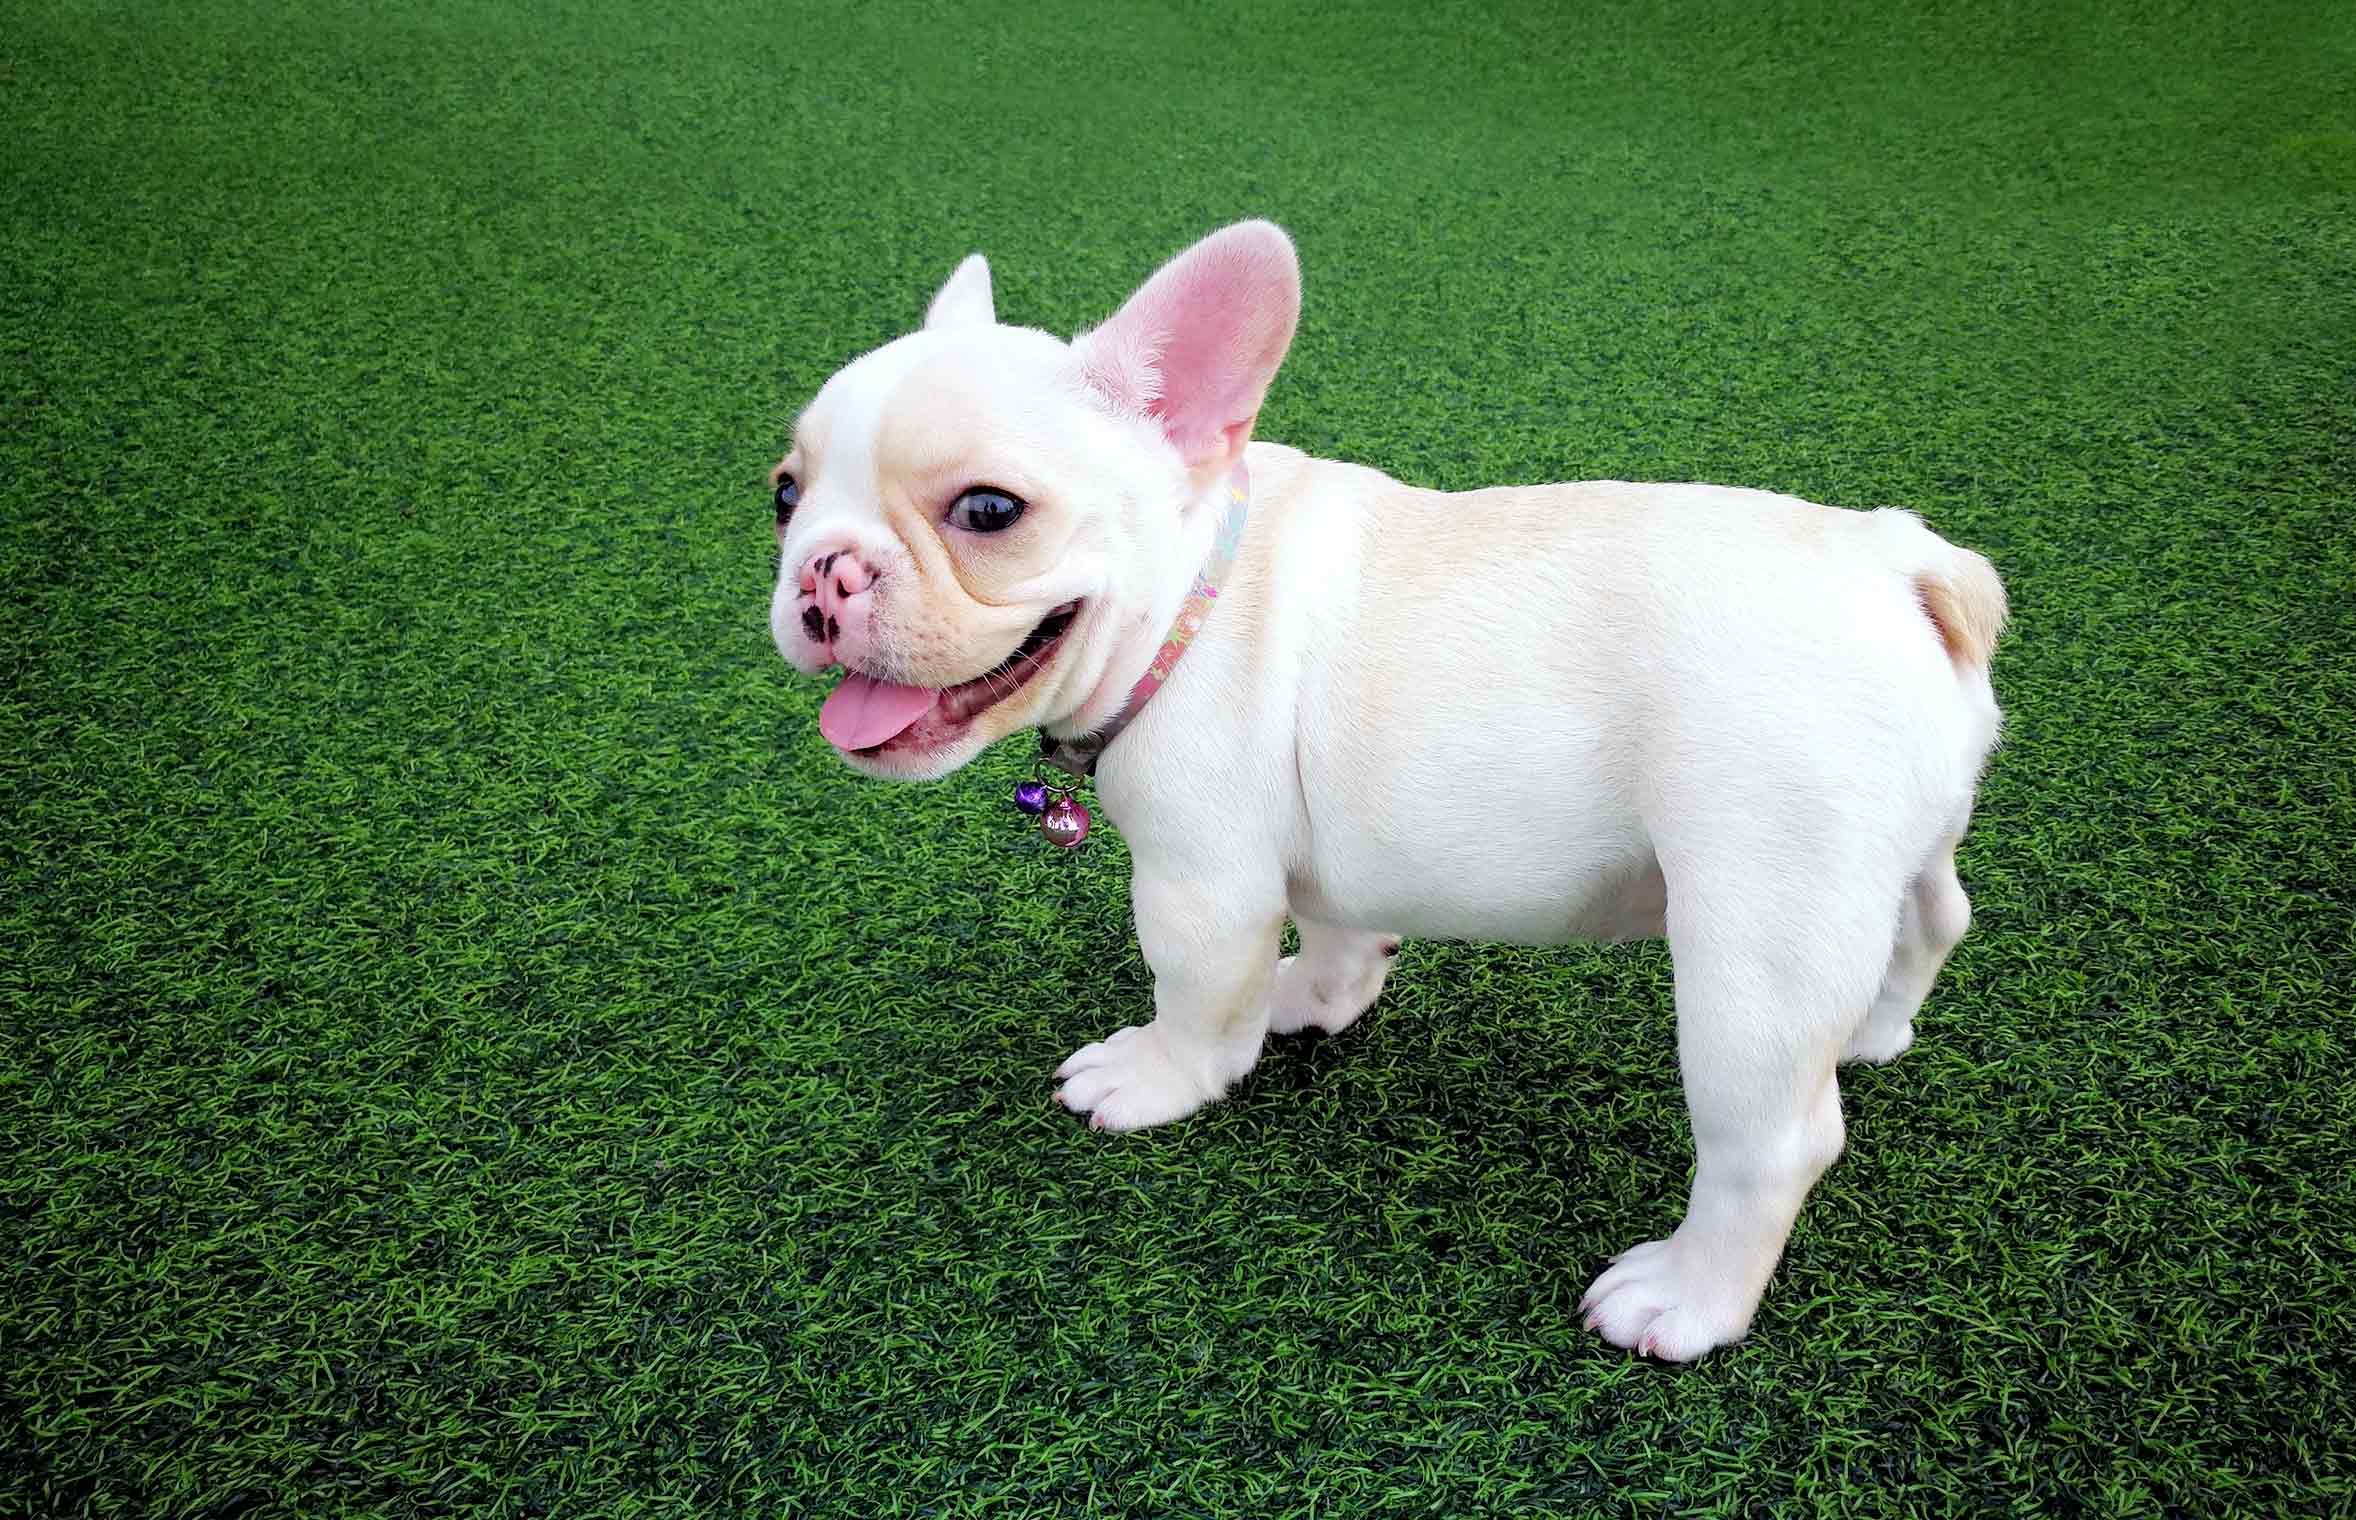 cute dog standing on artificial grass lawn